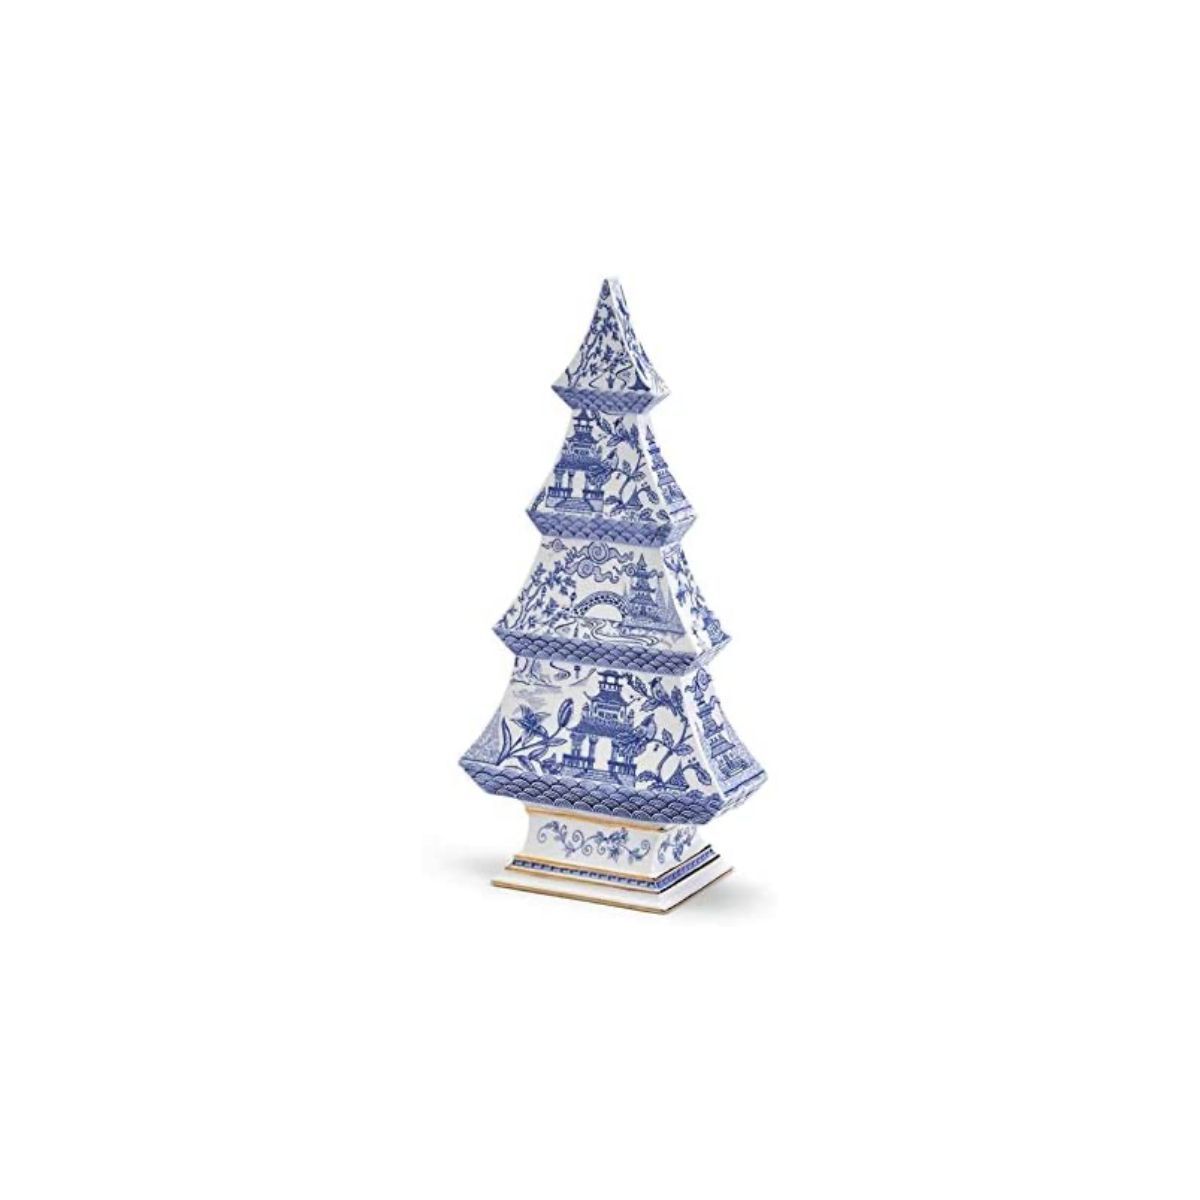 Blue and white ceramic tree Christmas decorations